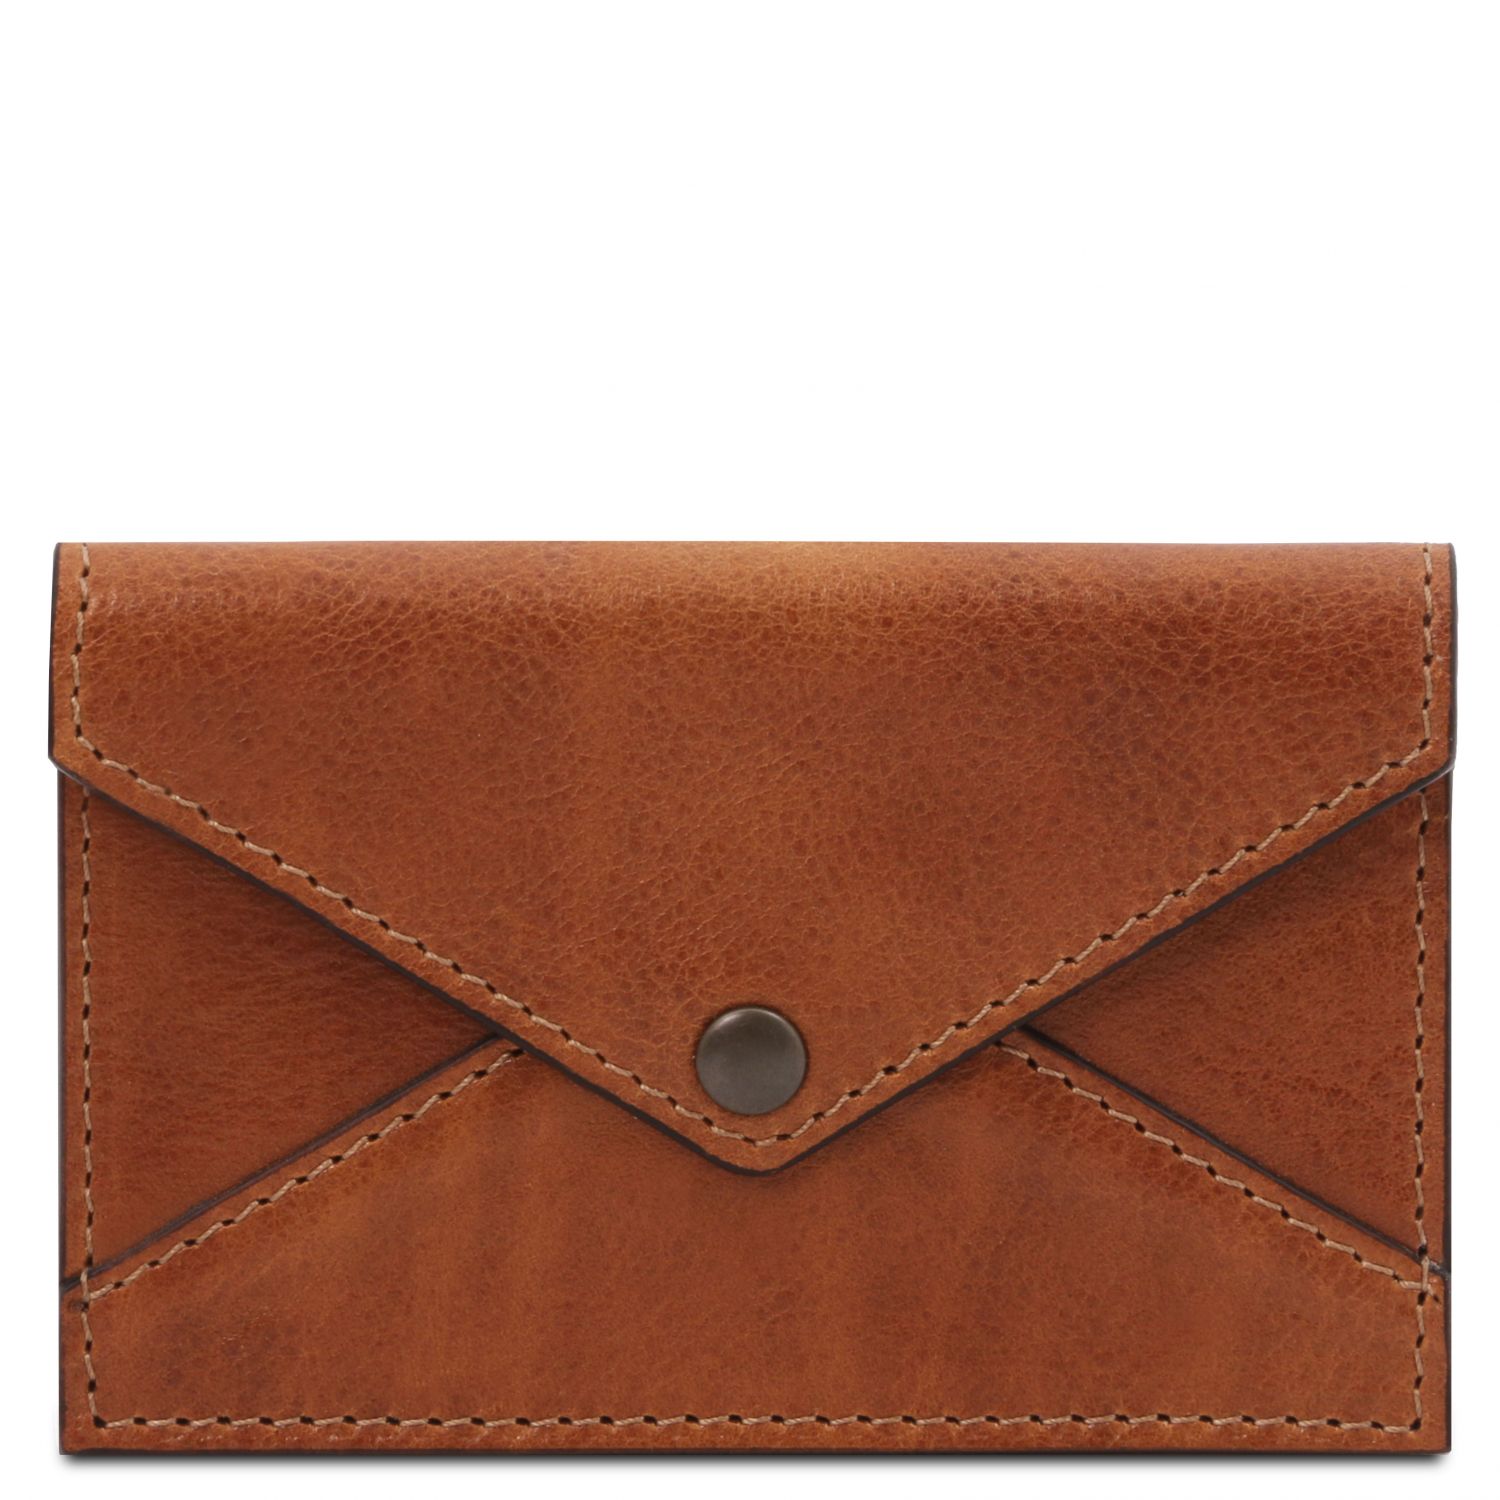 Leather business card - credit card holder - Pamiers